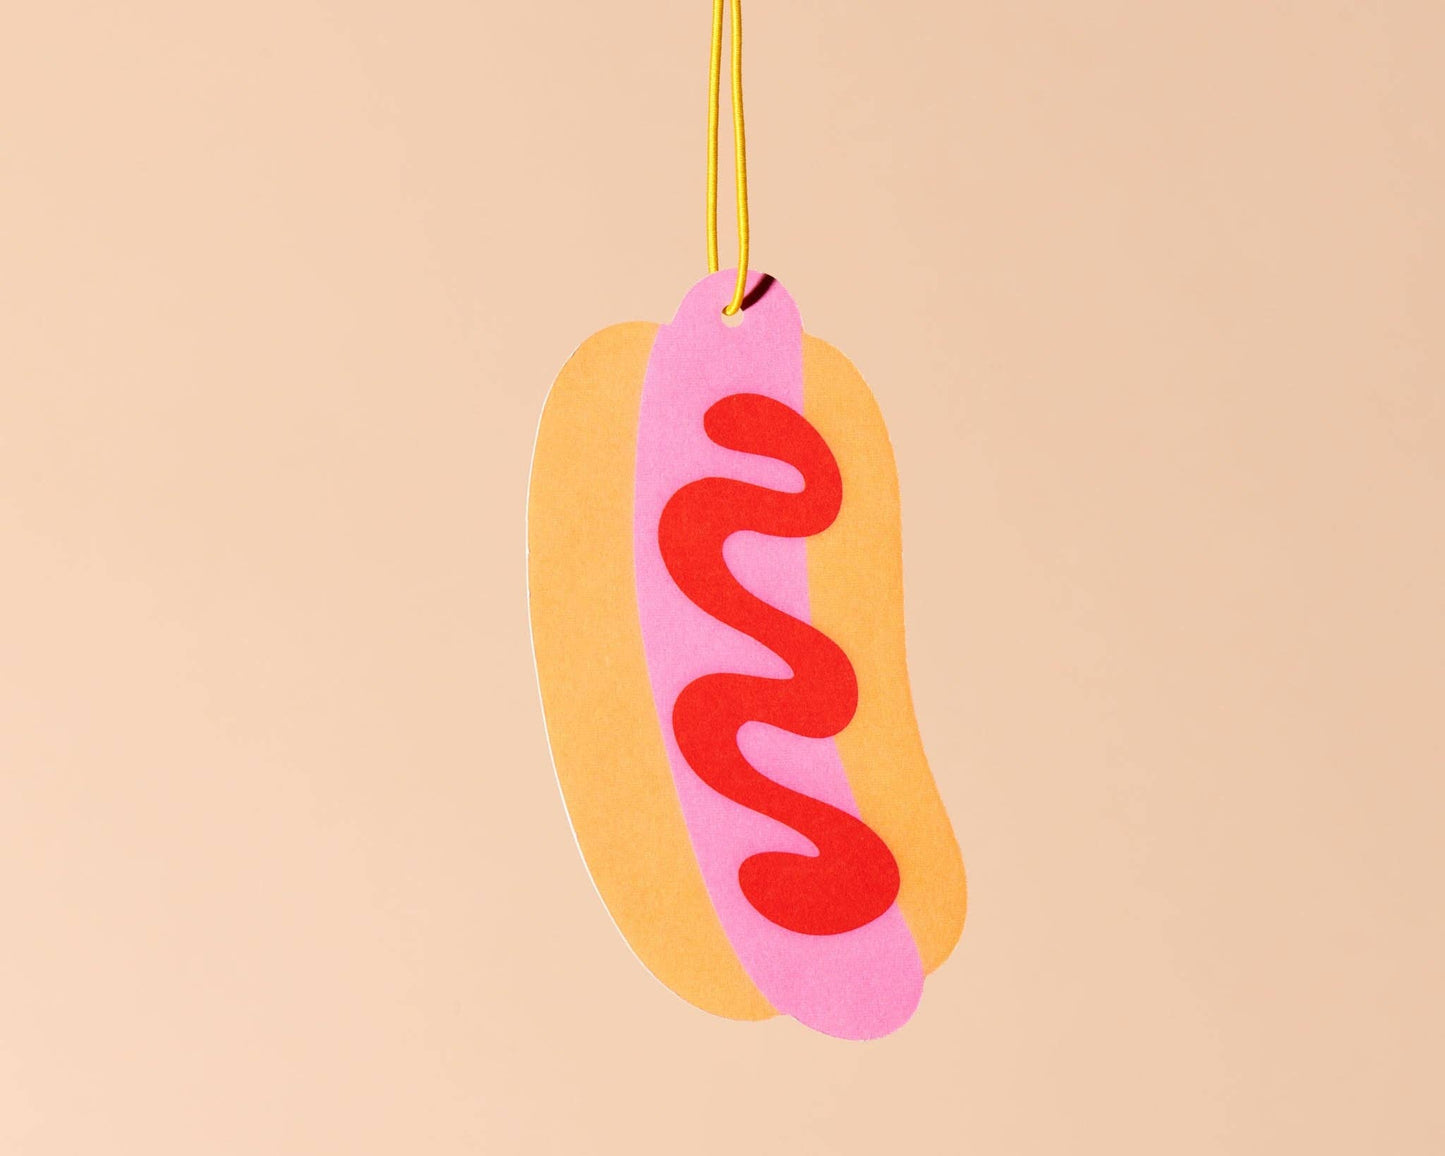 Hot dog shaped air freshener with ketchup on it. 